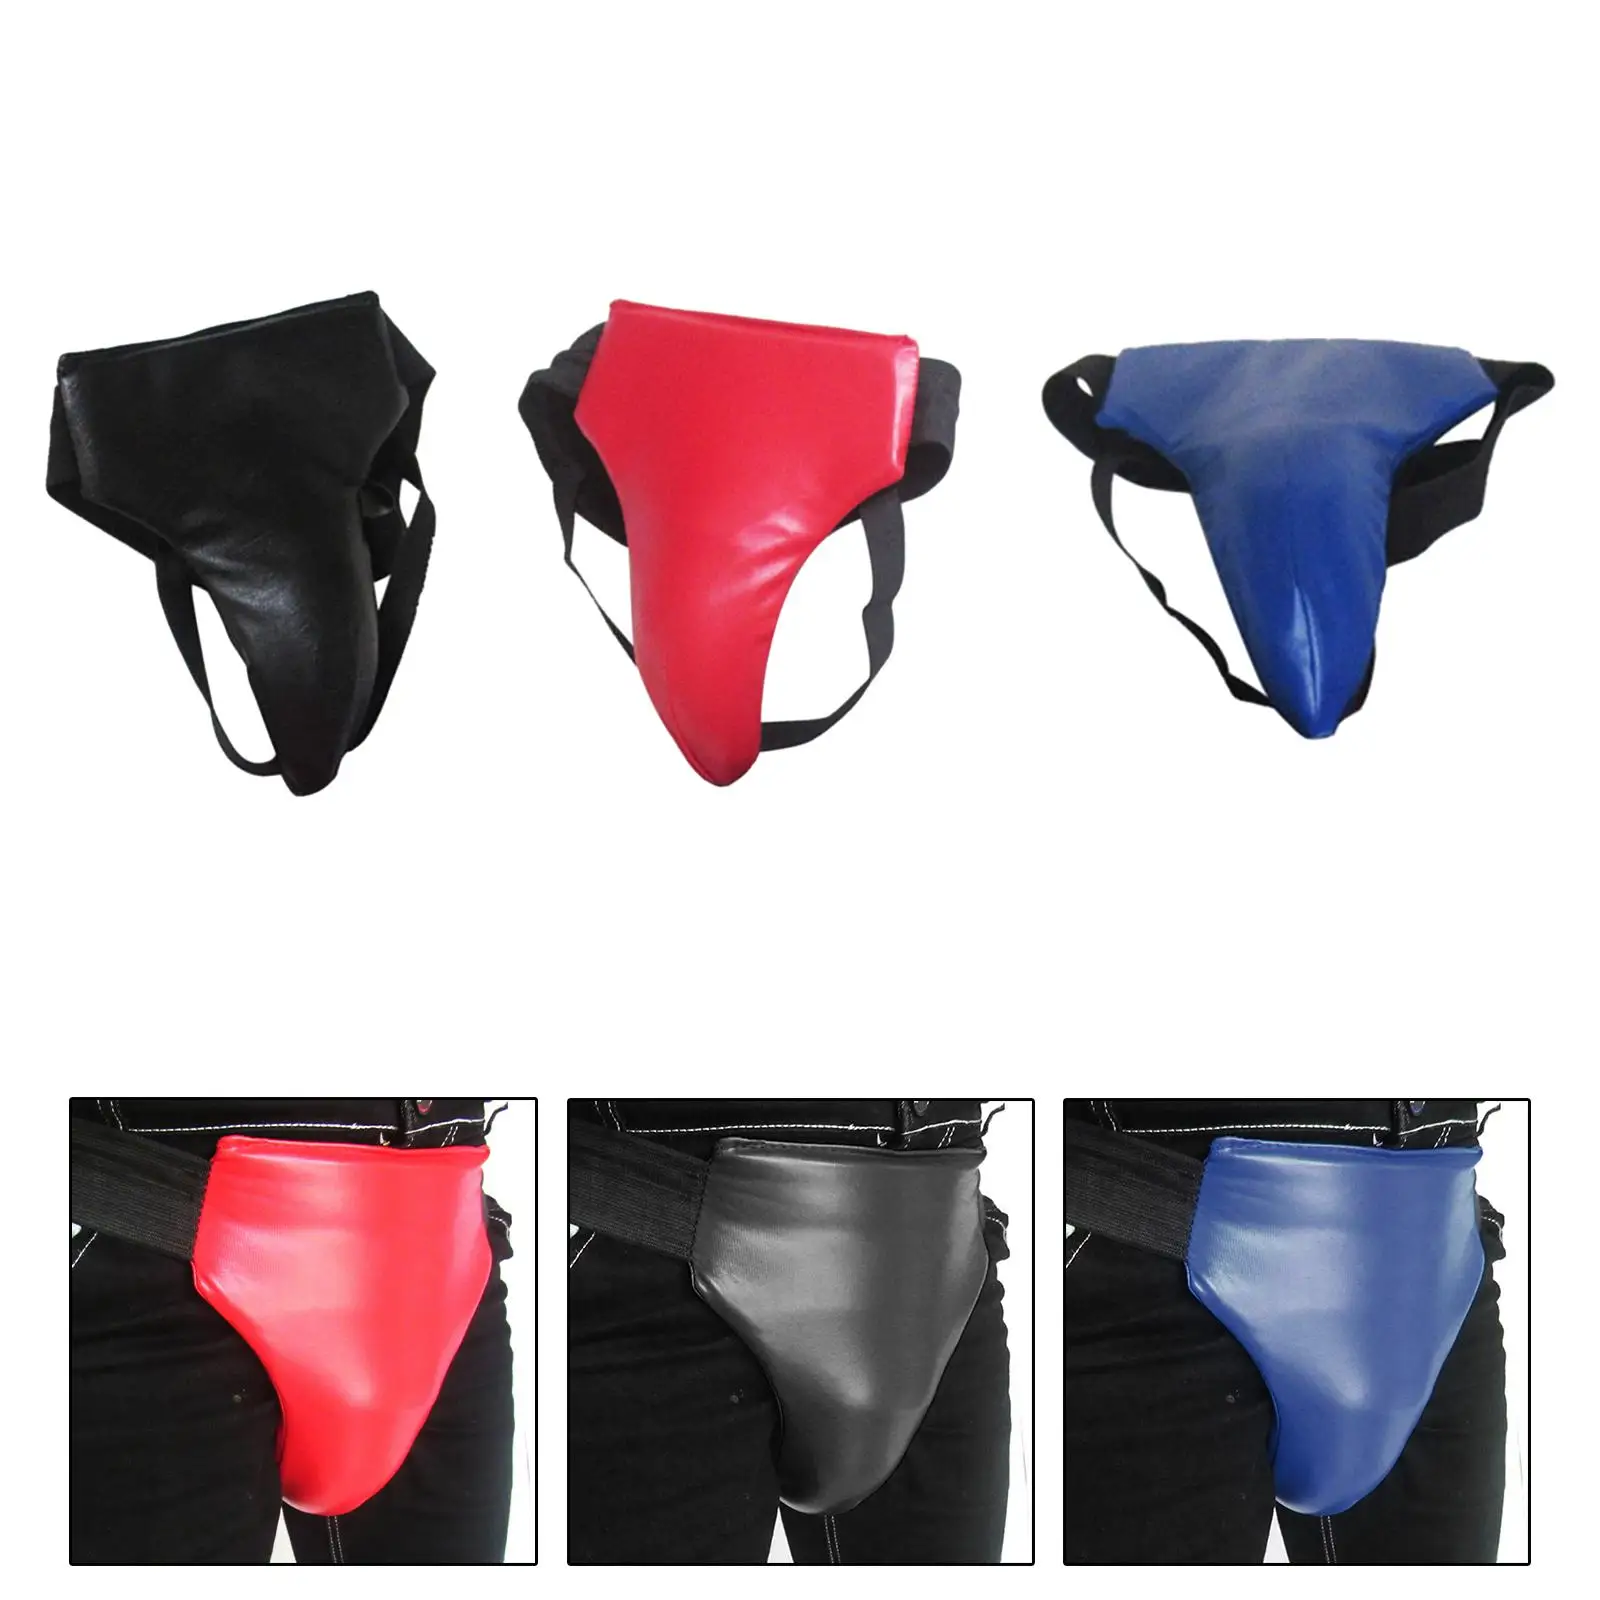 Mens Taekwondo Groin Protector Portable Men Abdominal Protector Crotch Protector for Sports Workout Karate Sparring Boxing